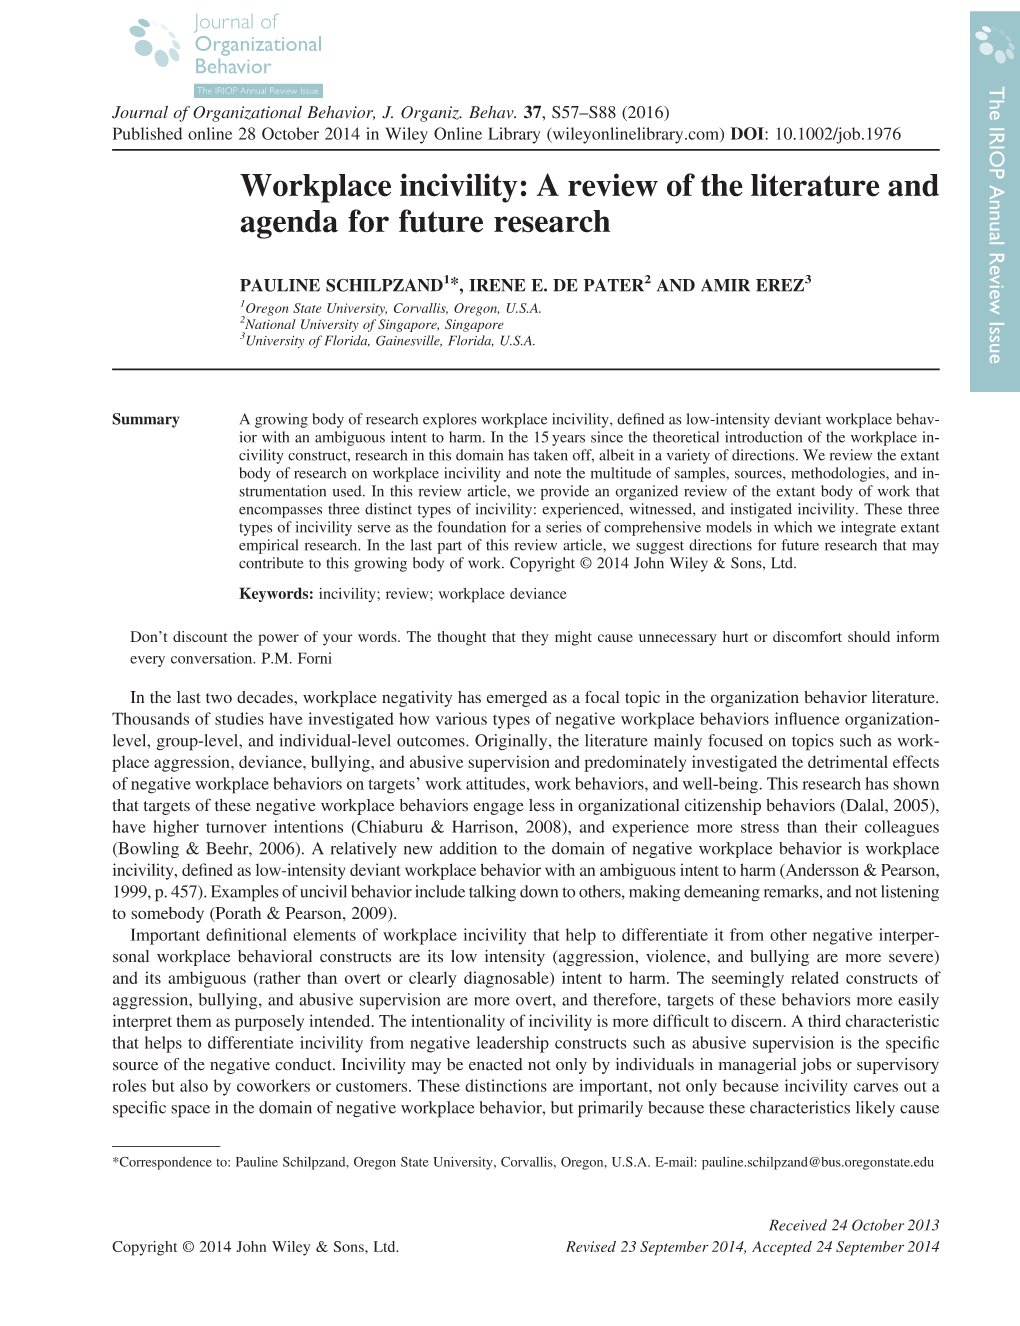 Workplace Incivility: a Review of the Literature and Agenda for Future Research